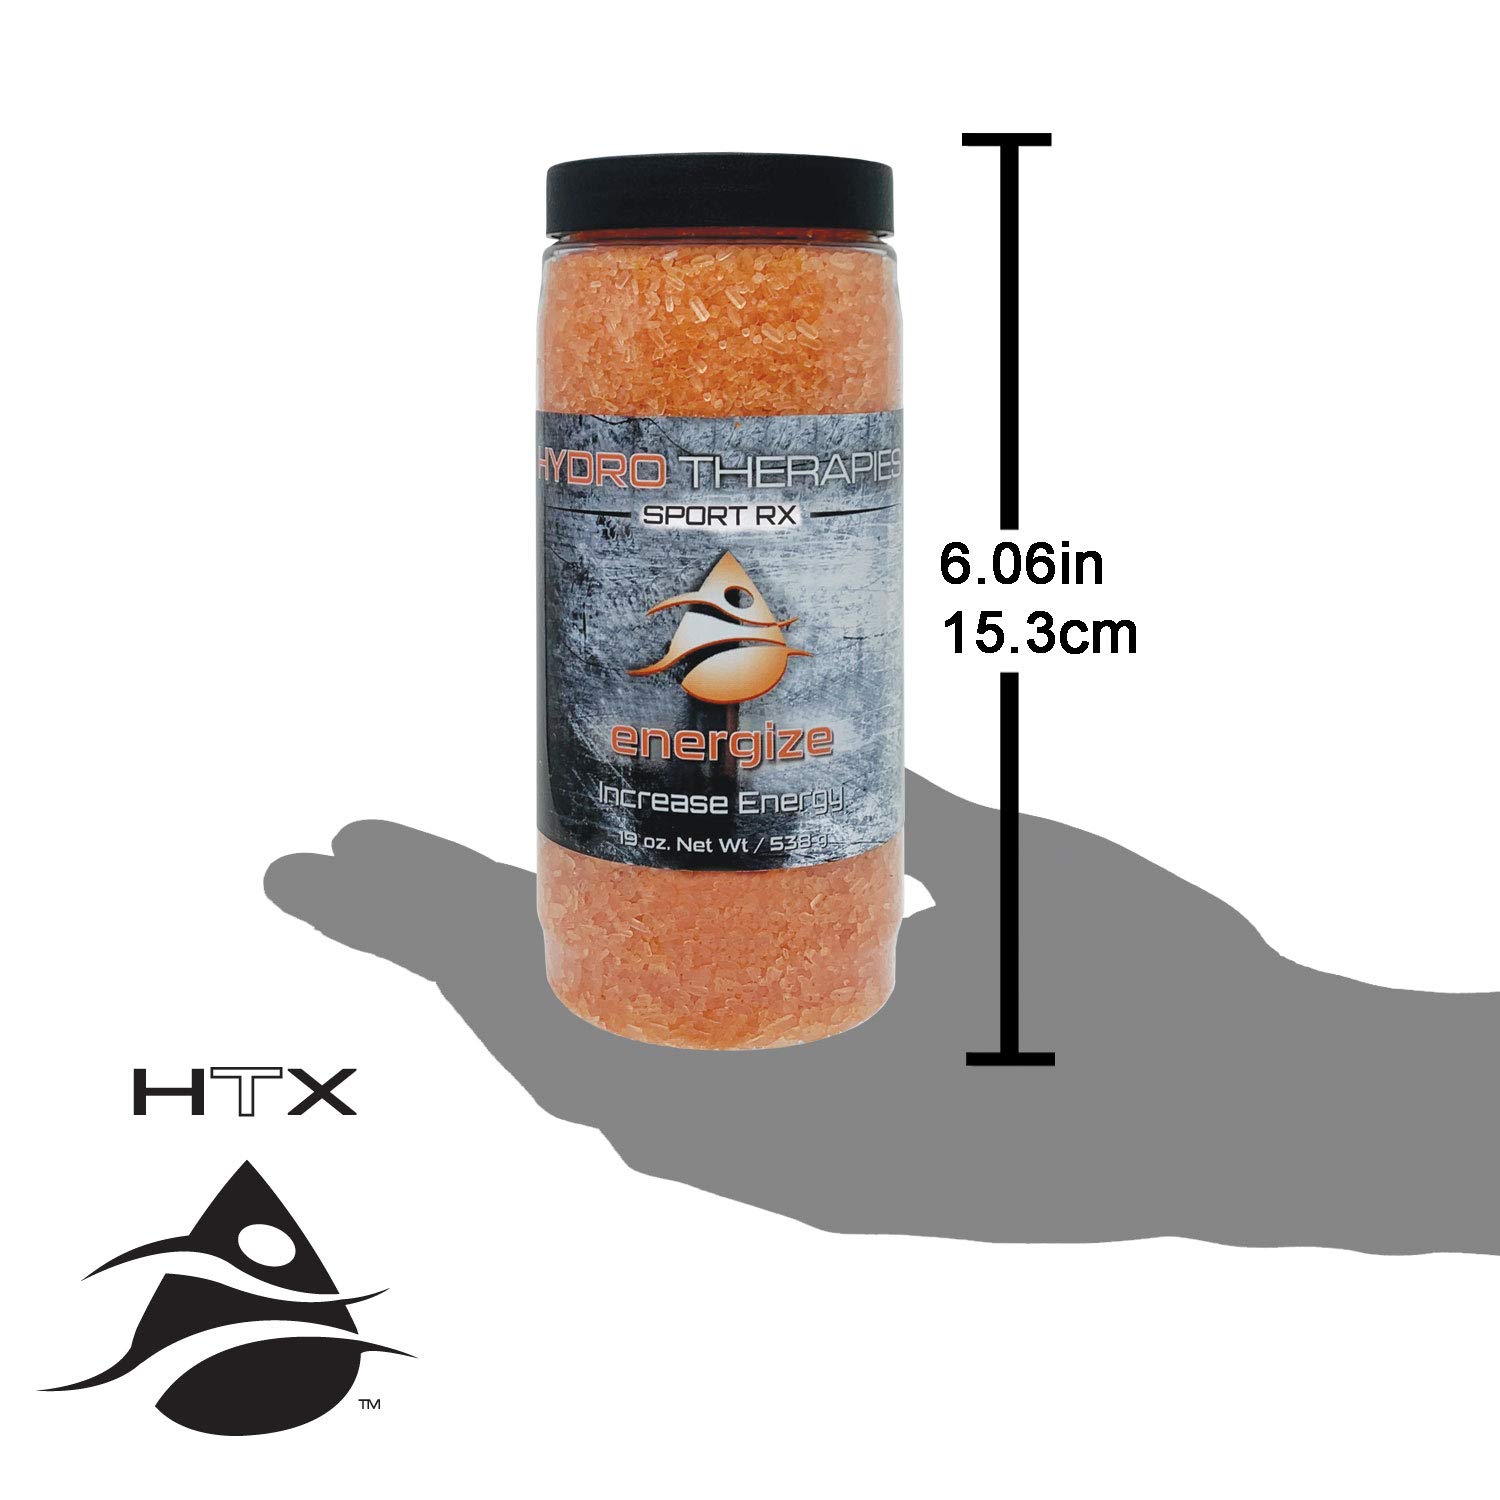 InSPAration 7492 HTX Energize Therapies Crystals for Spa and Hot Tubs, 19-Ounce, Orange